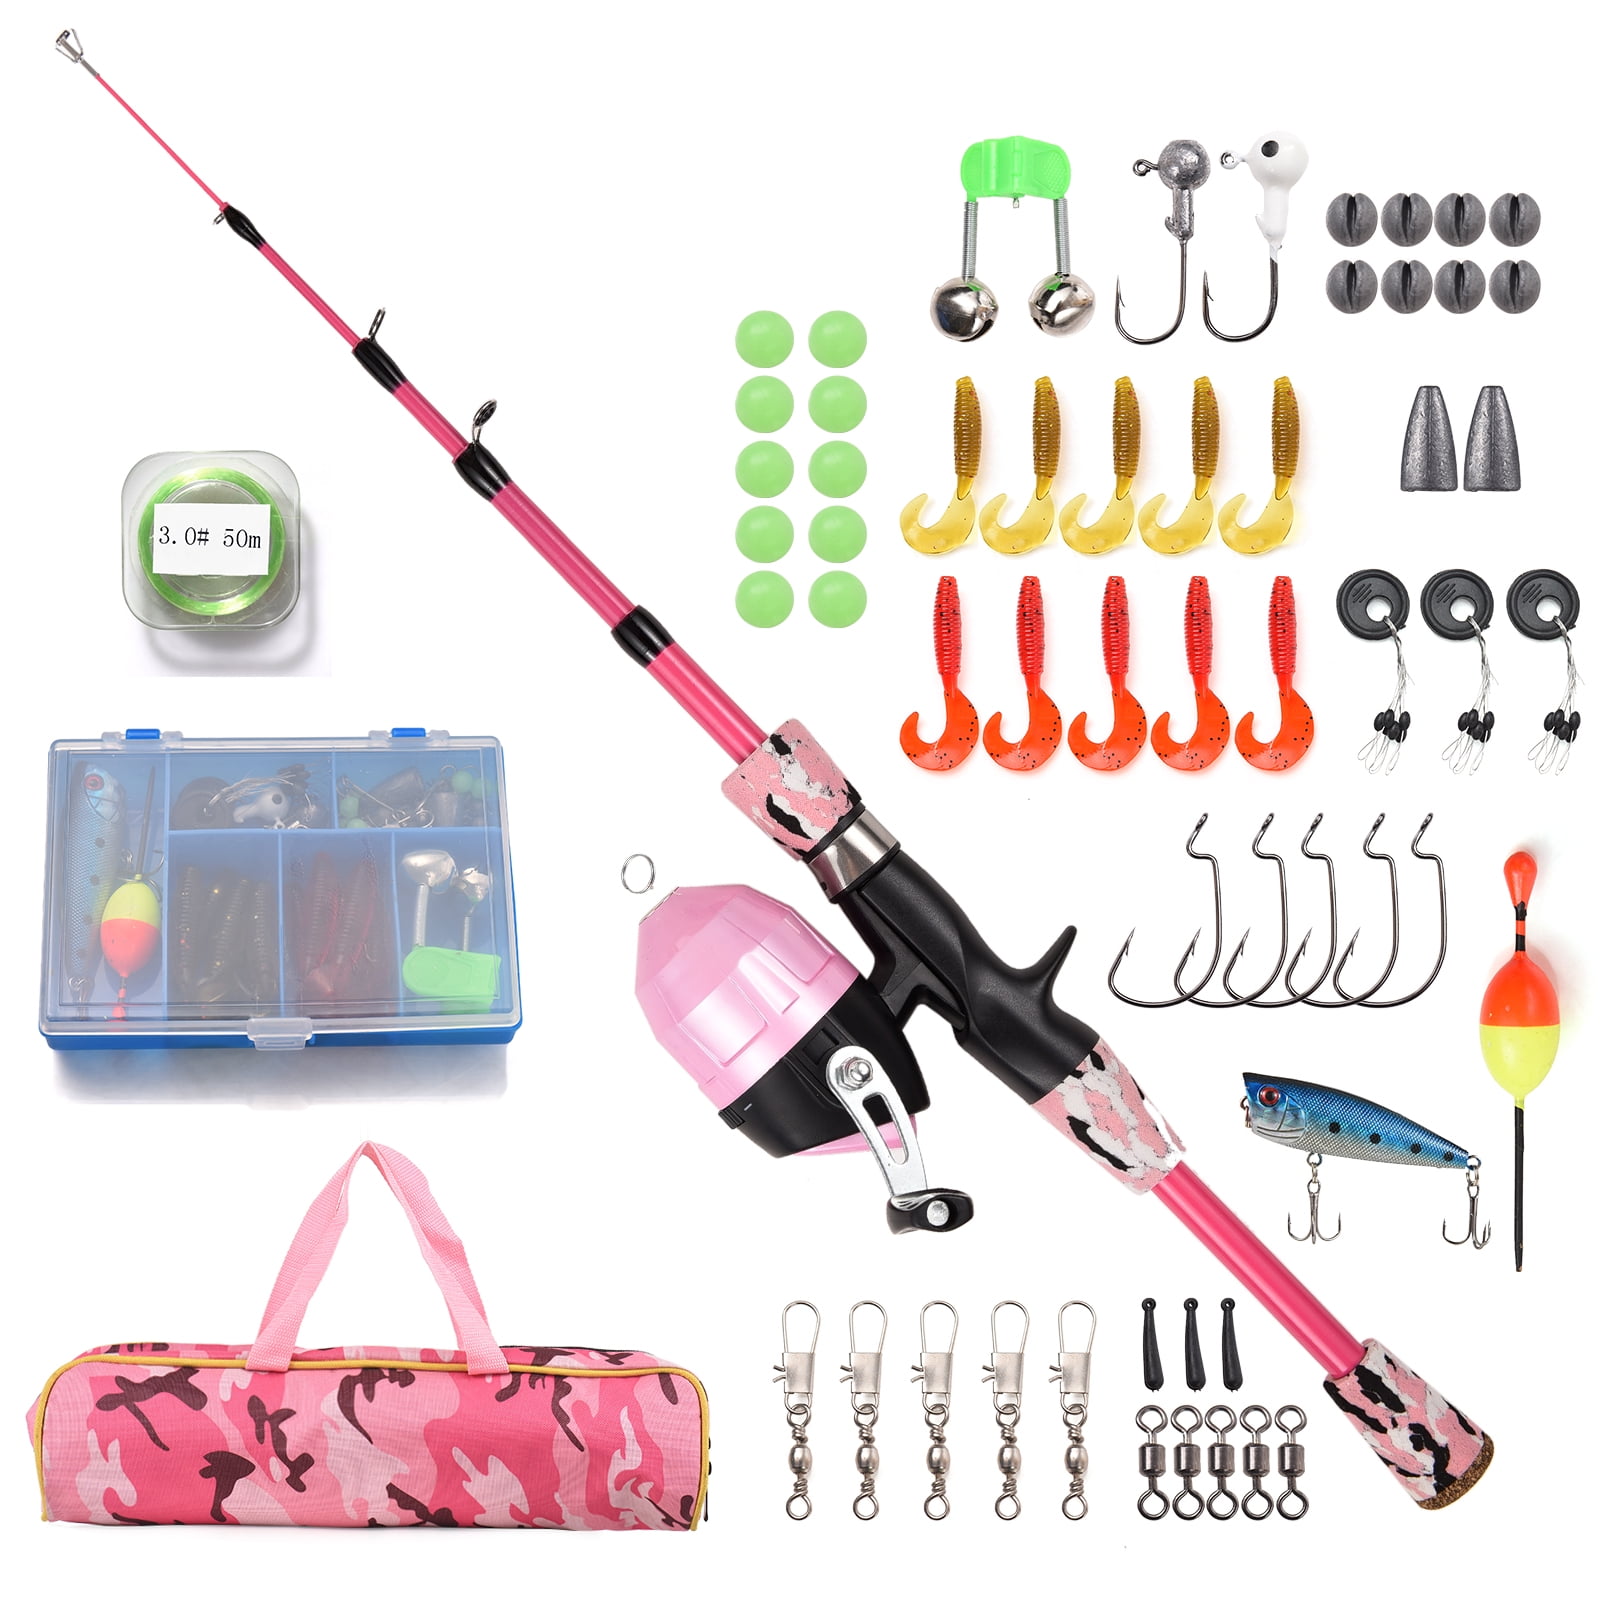 EDTara Telescopic Fishing Rod Reel Combos Set 1.8m Carbon Fiber Fishing Pole  With Full Kits Carrier Bag For Beginner And Youth Travel Saltwater  Freshwater 